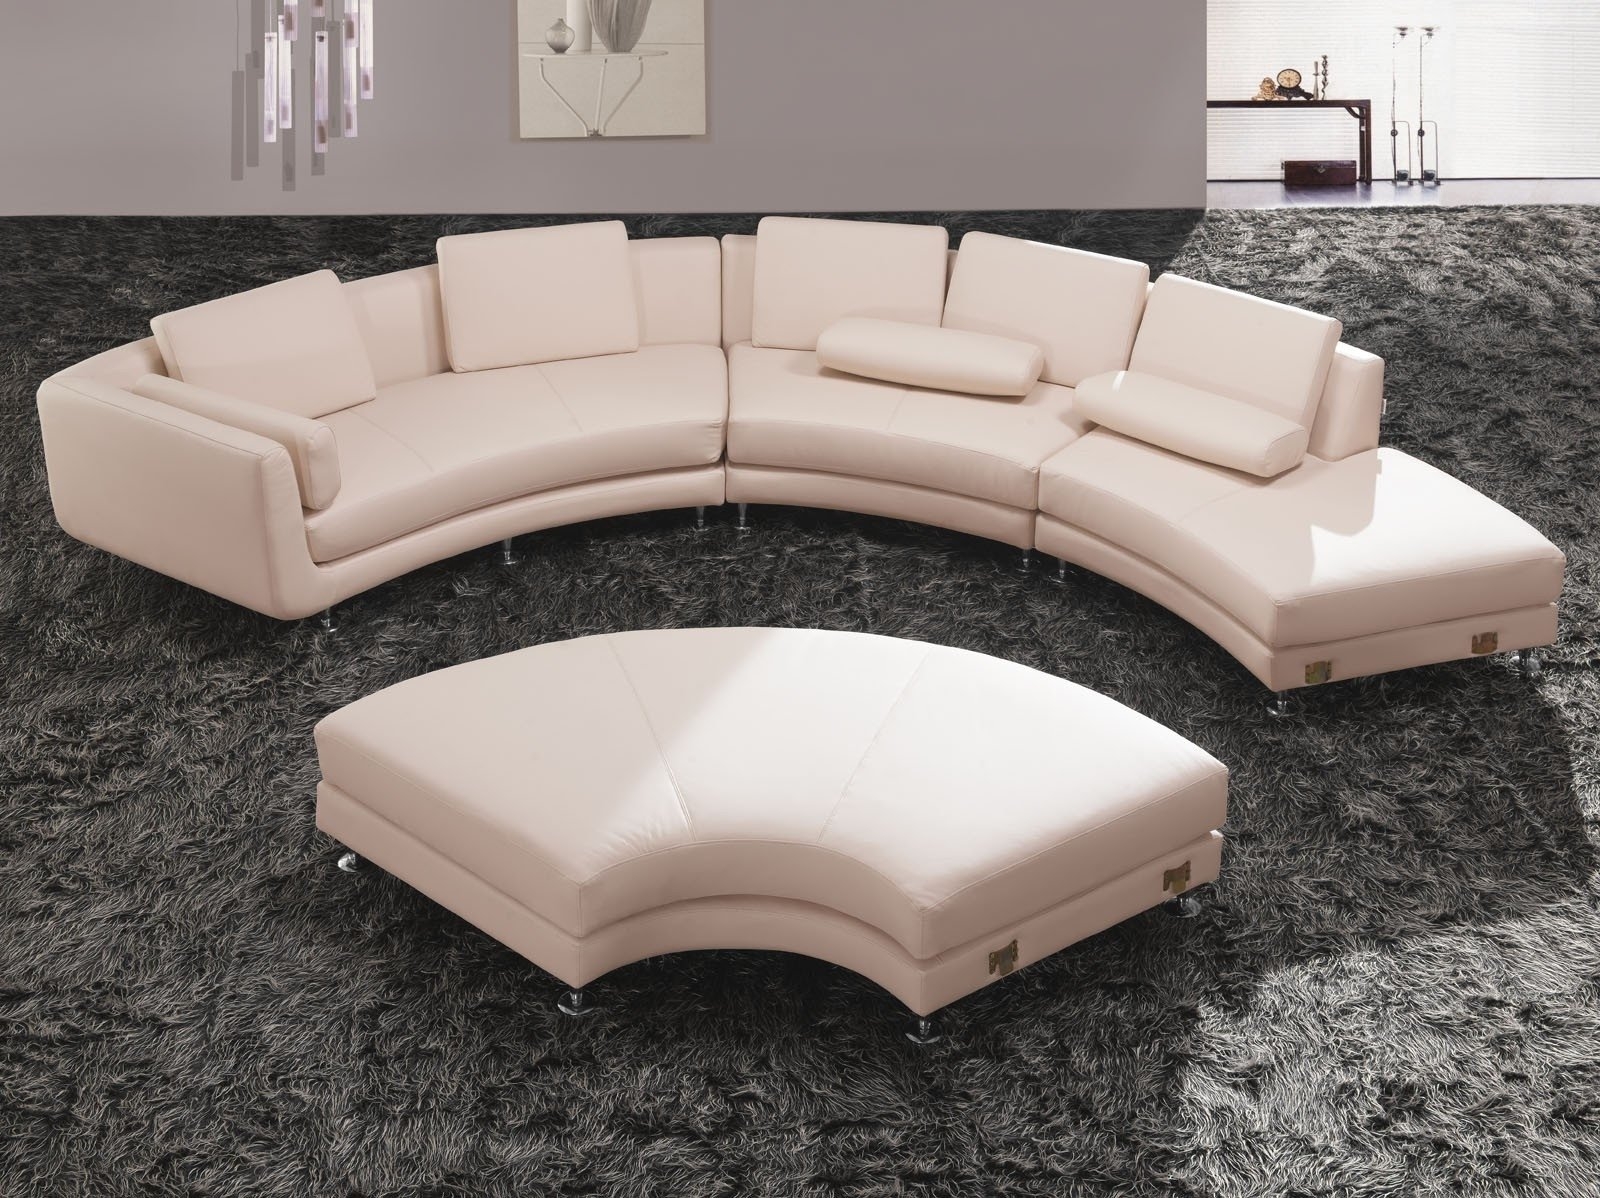 Circular sectional couch 1